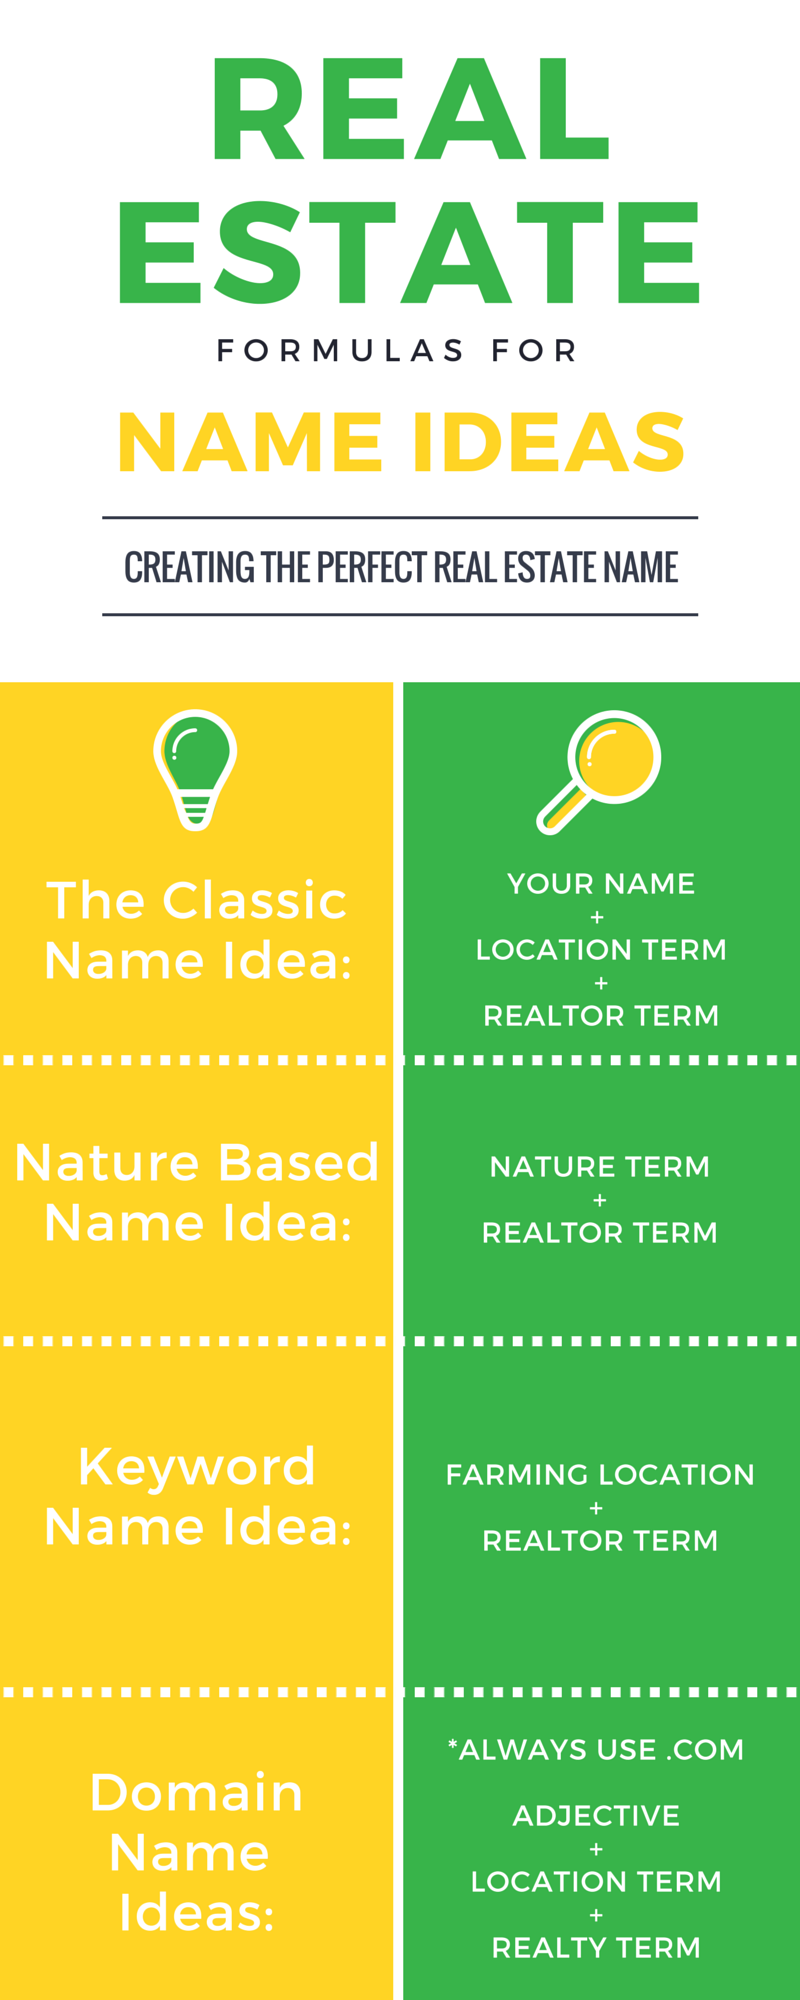 real estate name ideas infographic